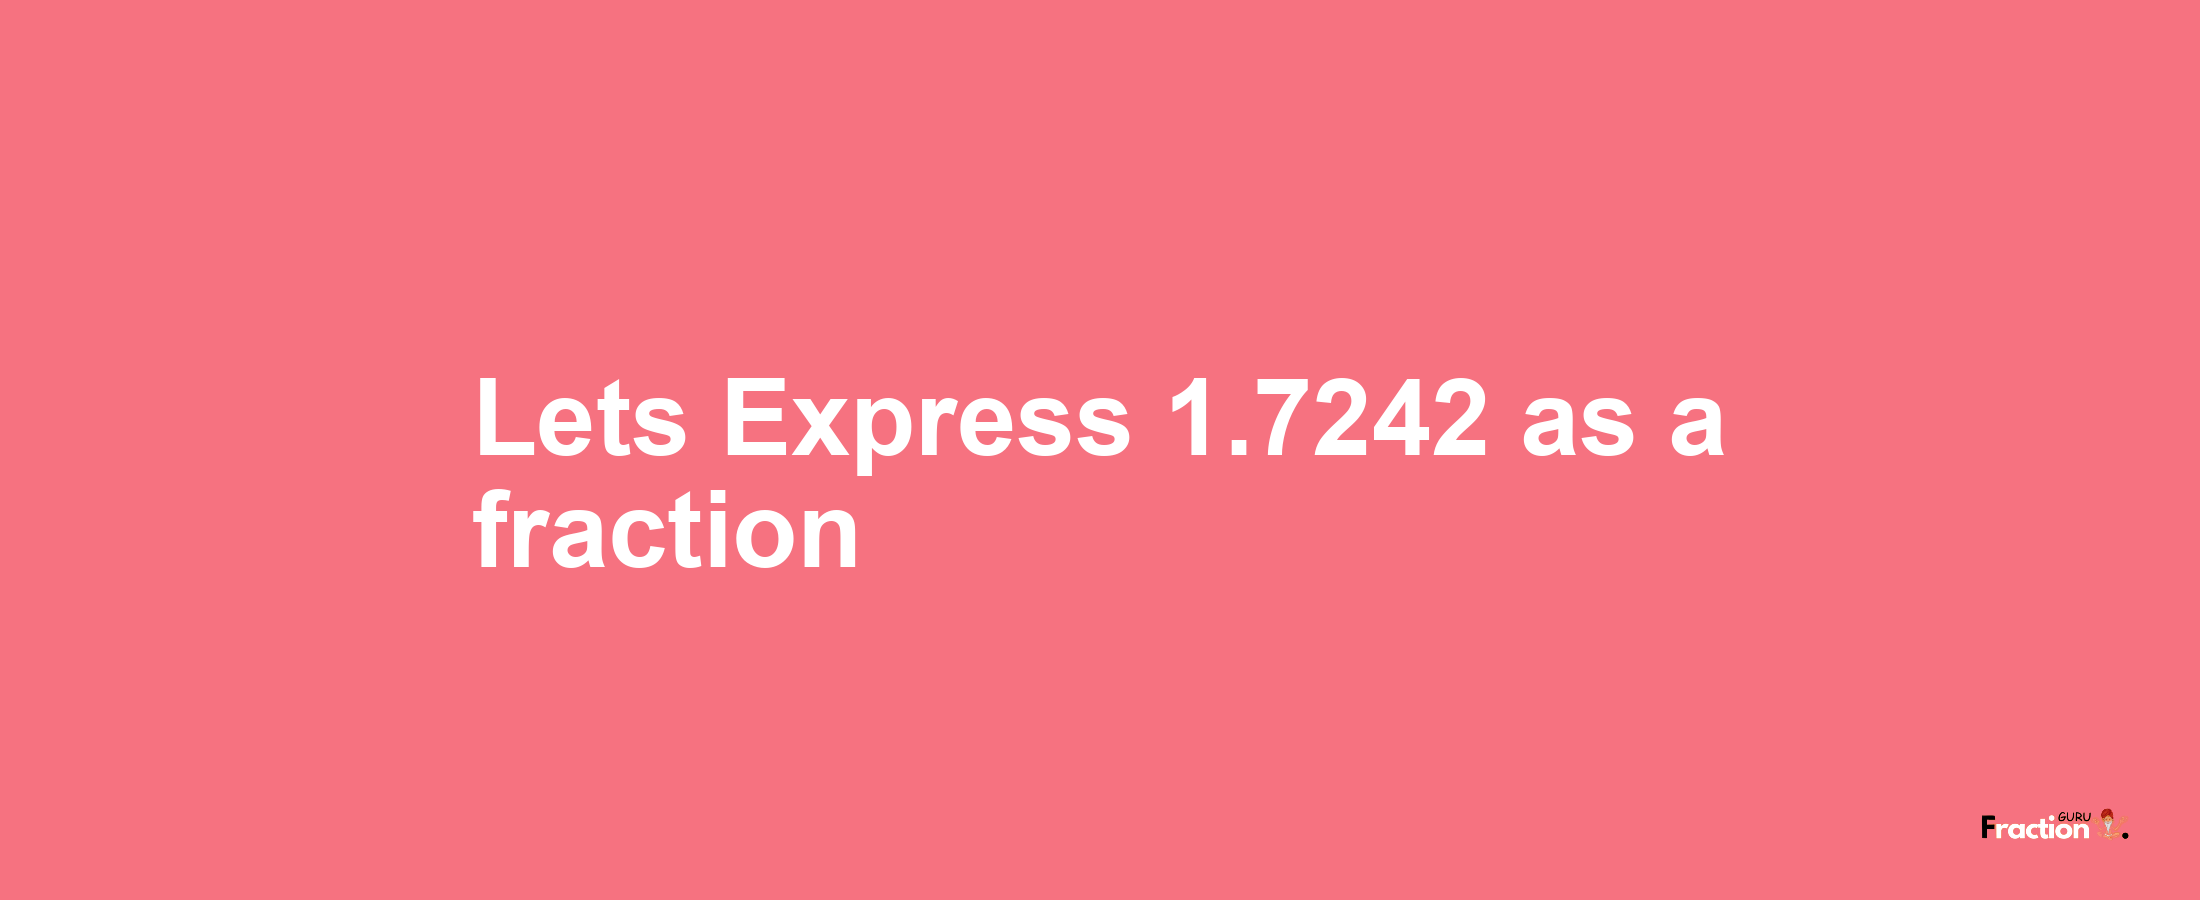 Lets Express 1.7242 as afraction